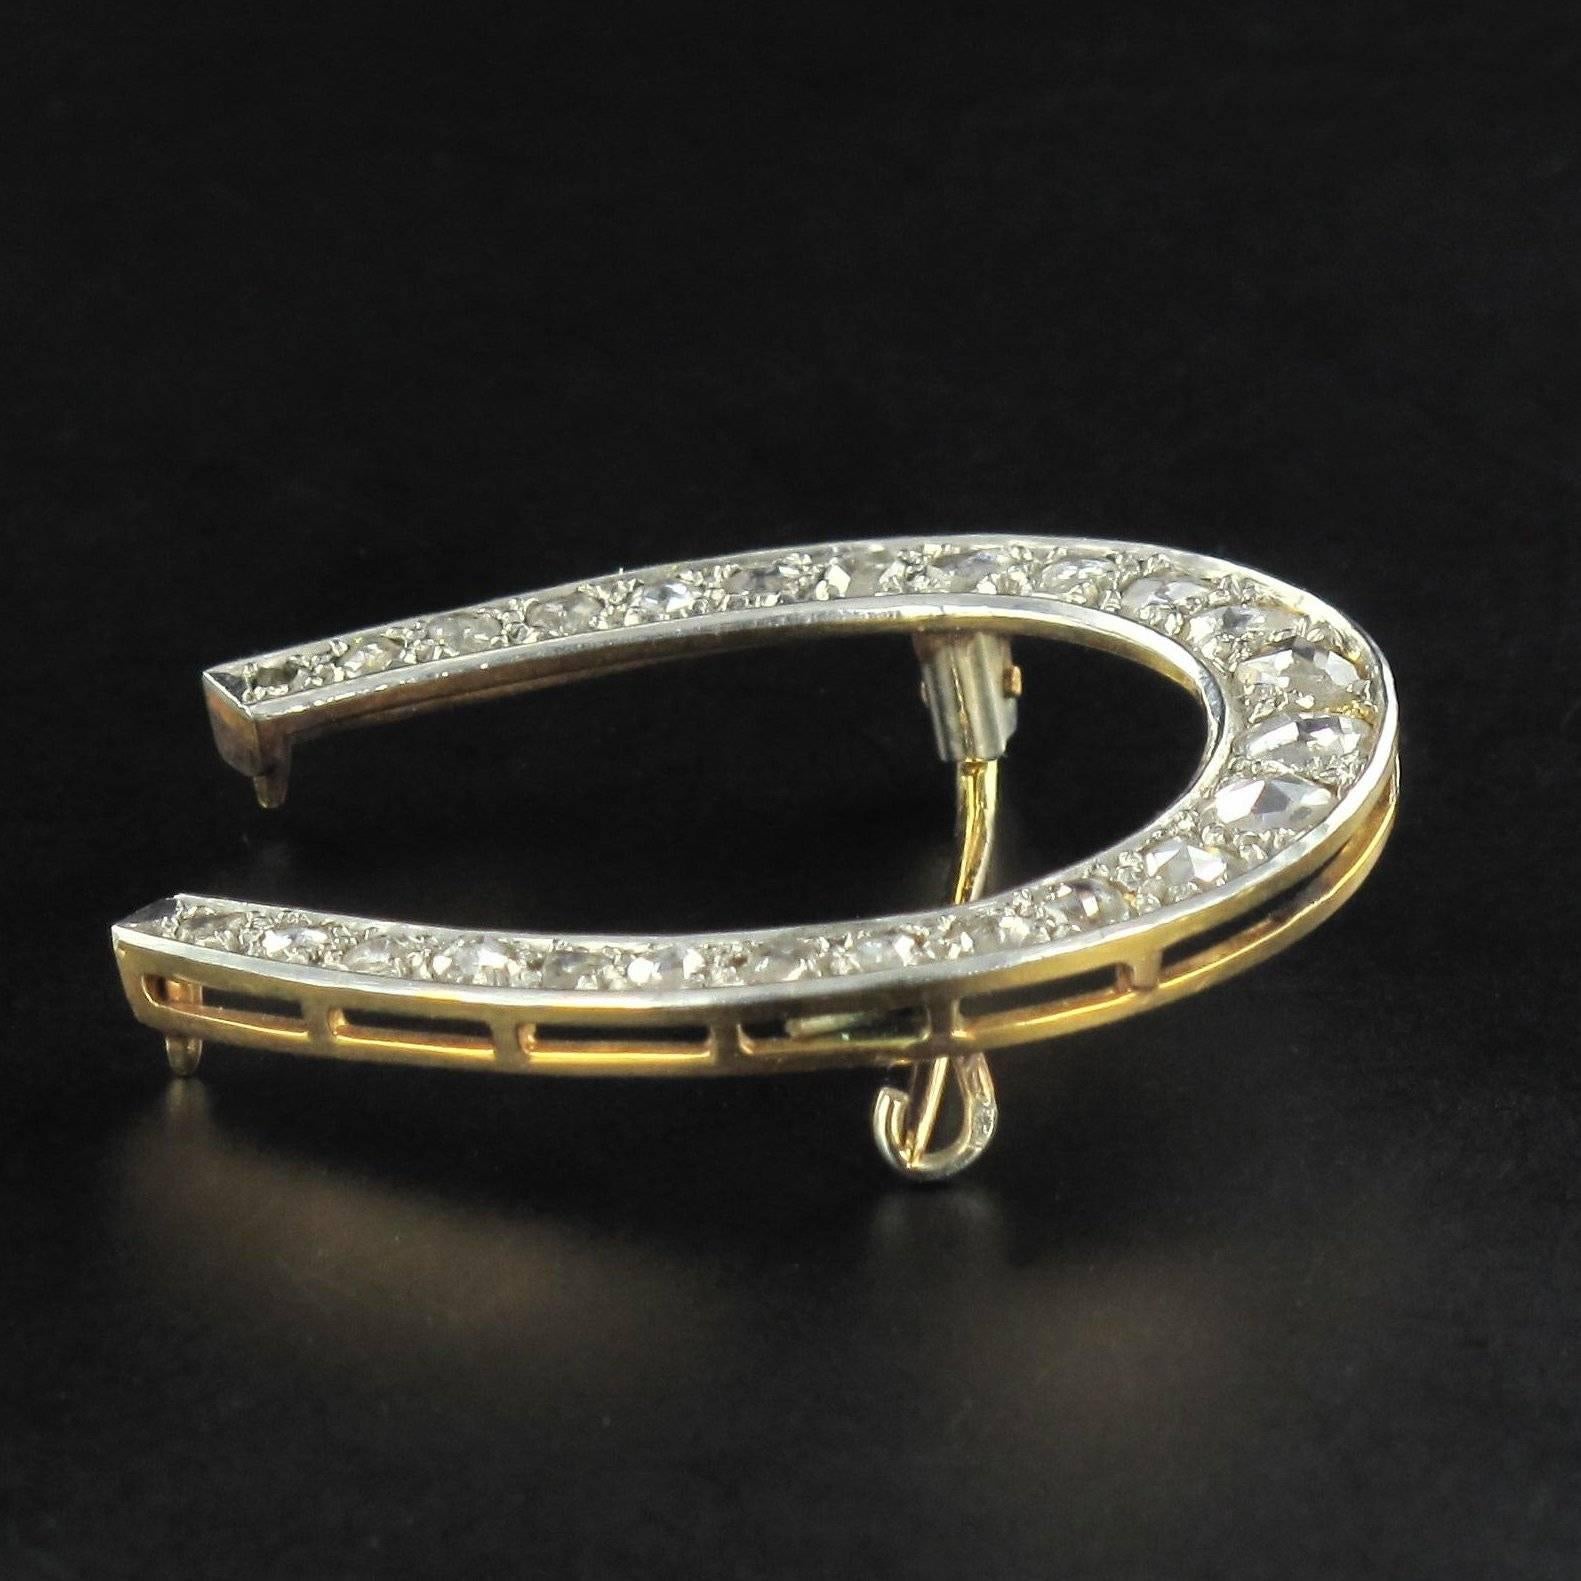 Brooch in 18 carat yellow gold and platinum eagle head and grotesque hallmarks.
In the form of a horseshoe, this brooch is set with rose cut diamonds. The clasp is a pin. 
Length: 3.5 cm, width 2.7 cm.
Total diamond weight: about 0.80 carat.
Total